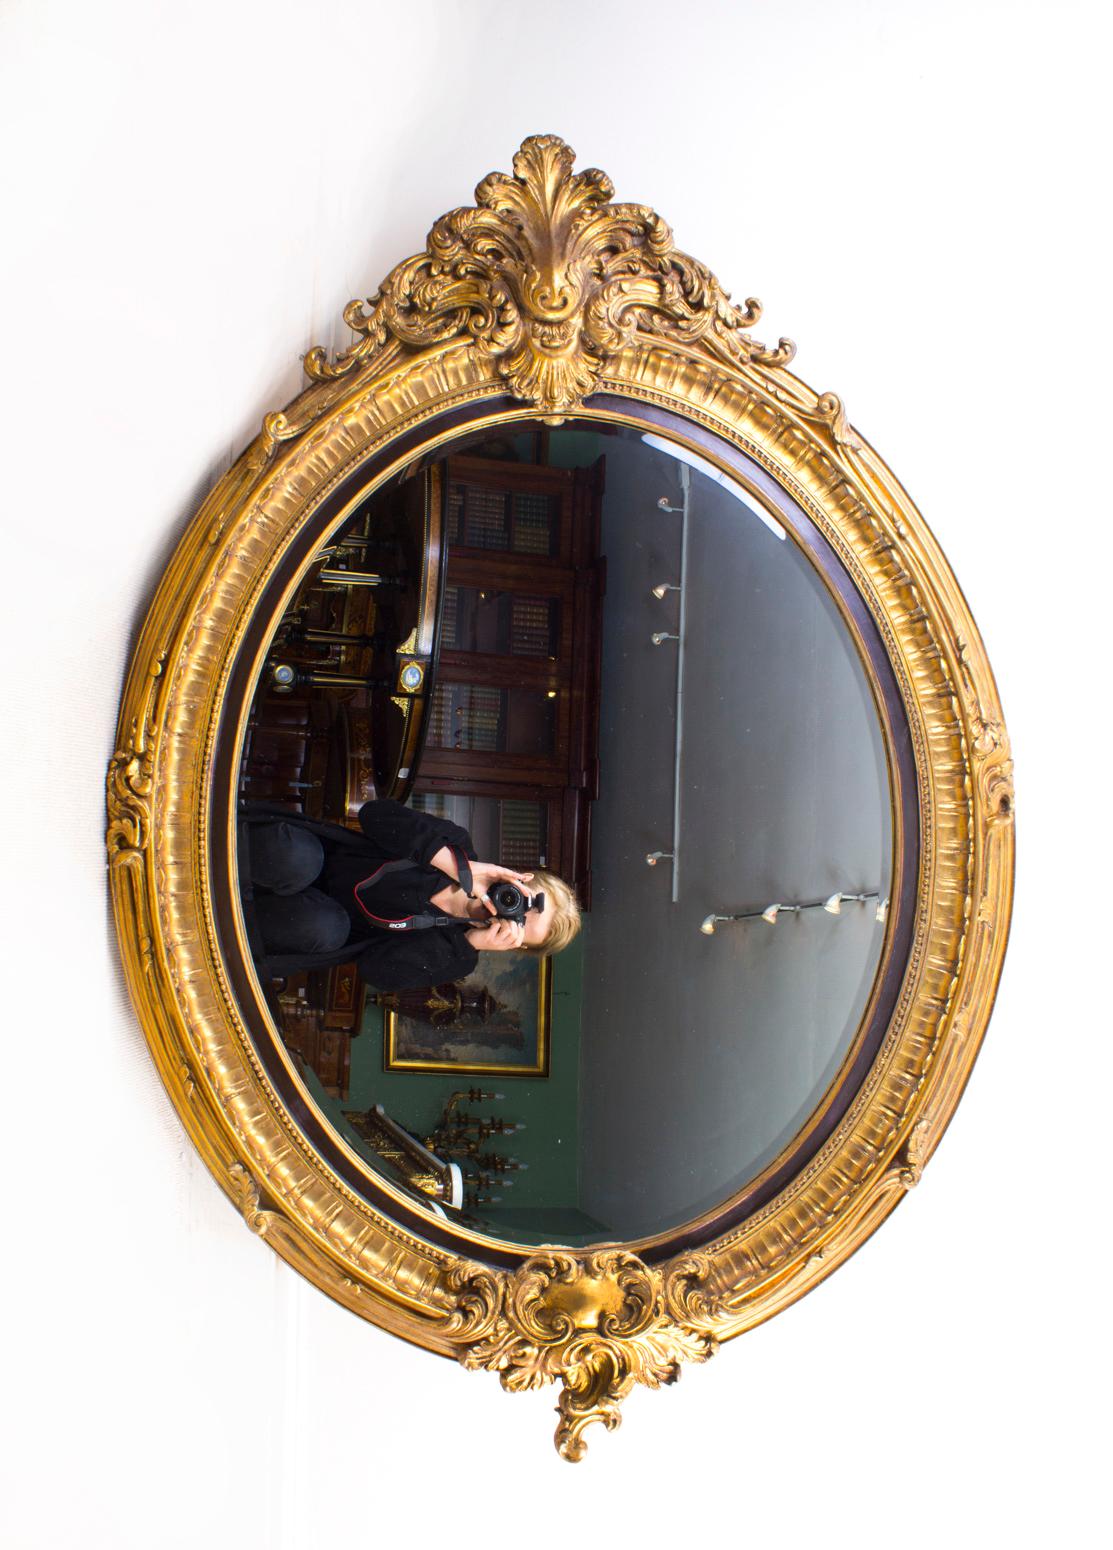 This is a beautiful and highly decorative Vintage Italian Rocco style oval gilt mirror. 

The mirror feature a beautiful deeply carved central shell motif to the top and a cartouche shape plaque on the bottom with decorative acanthus details and a